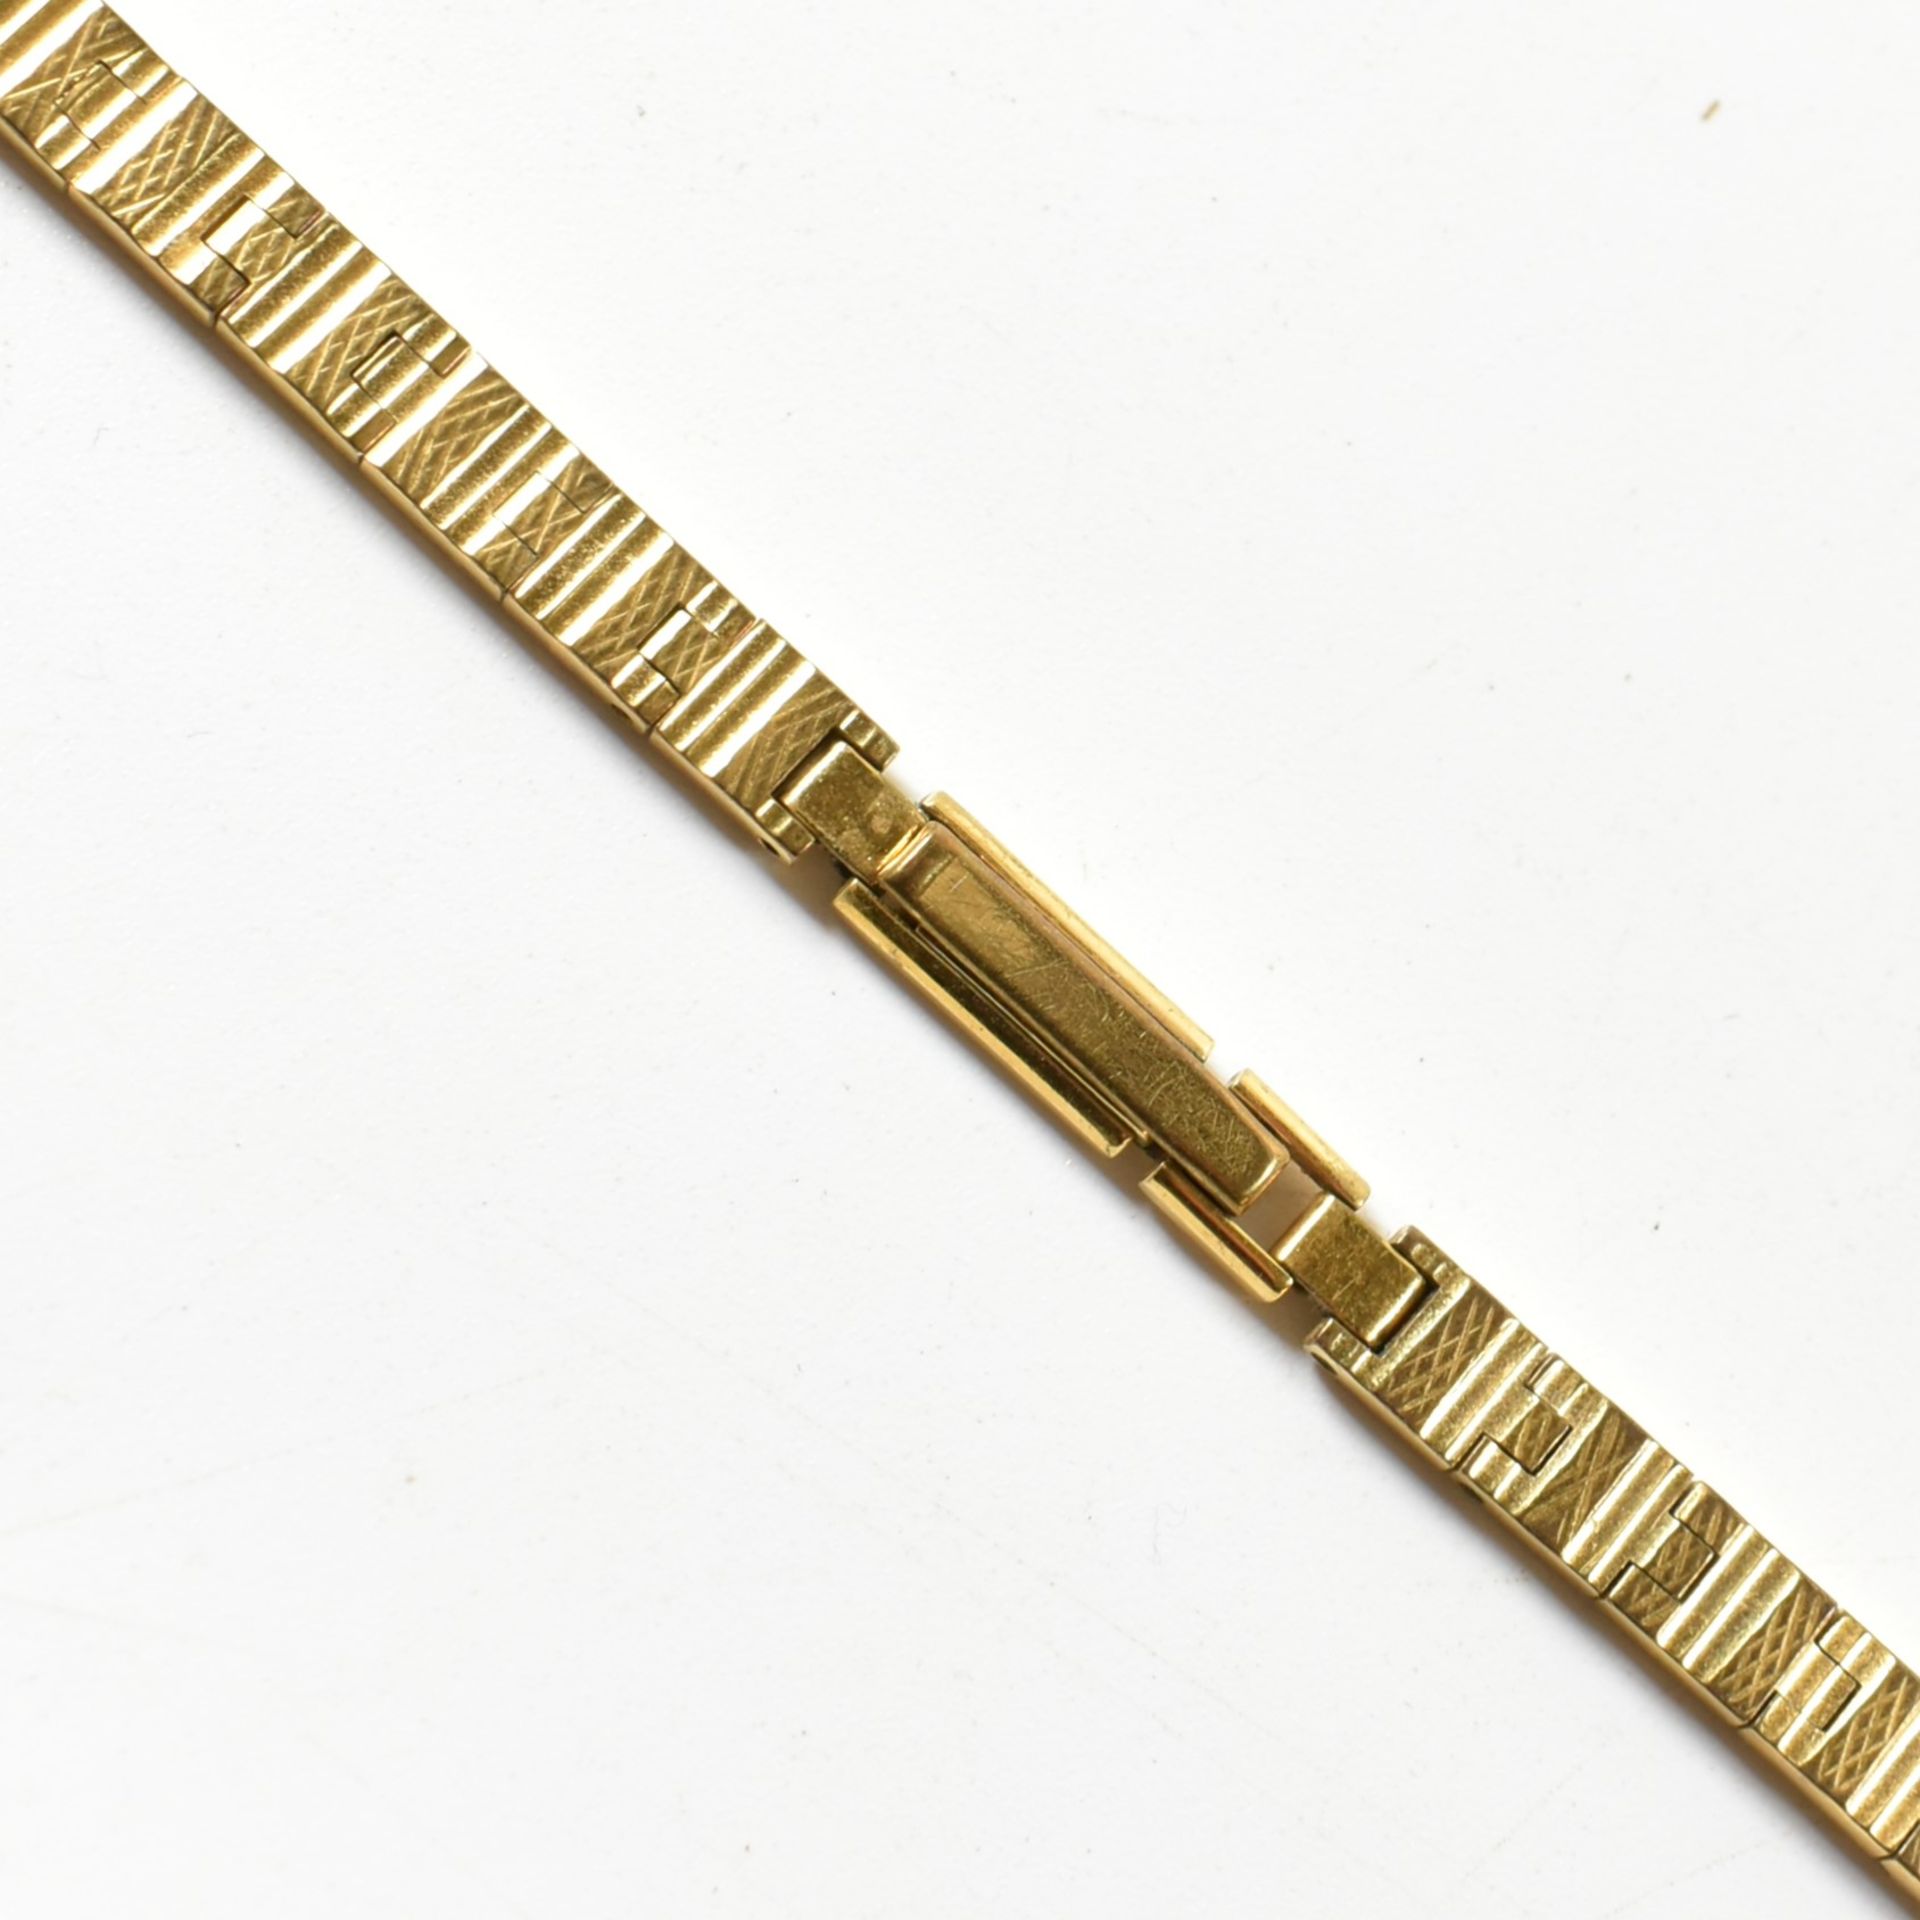 HALLMARKED 9CT GOLD OMEGA WATCH ON GILDED STRAP - Image 3 of 5